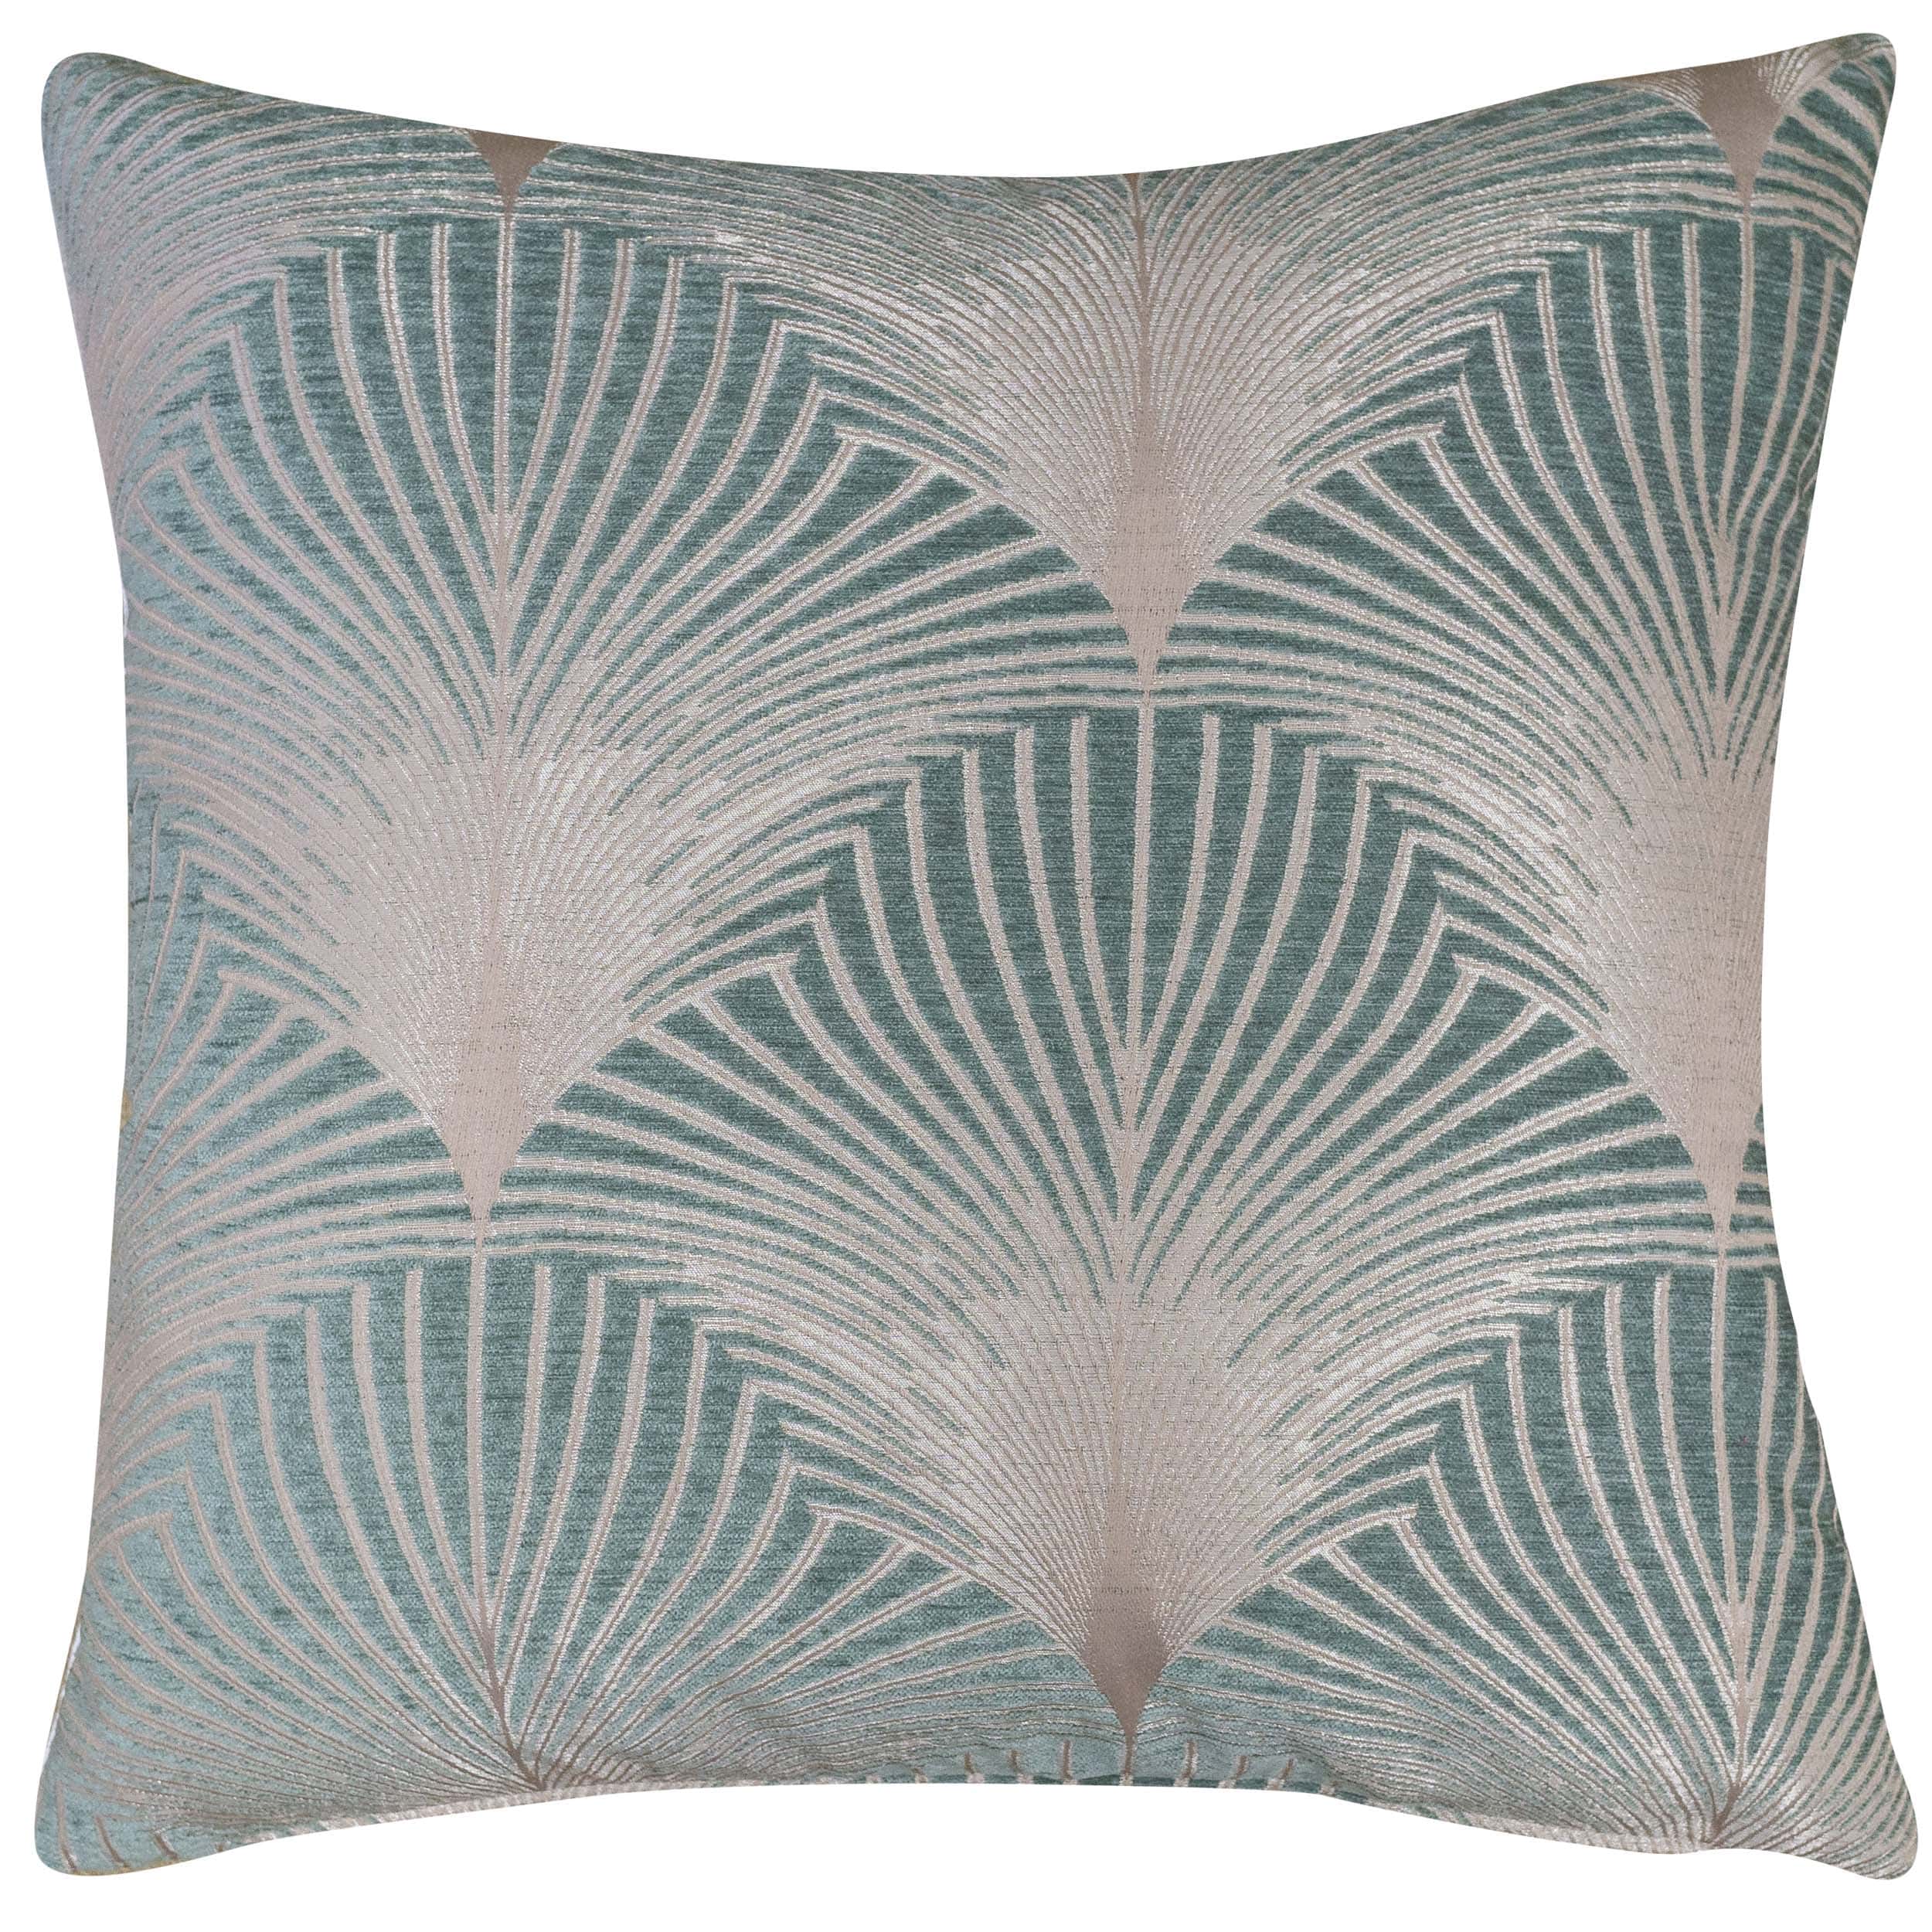 Art Deco Fan Extra-Large Cushion in Duck Egg Blue and Natural